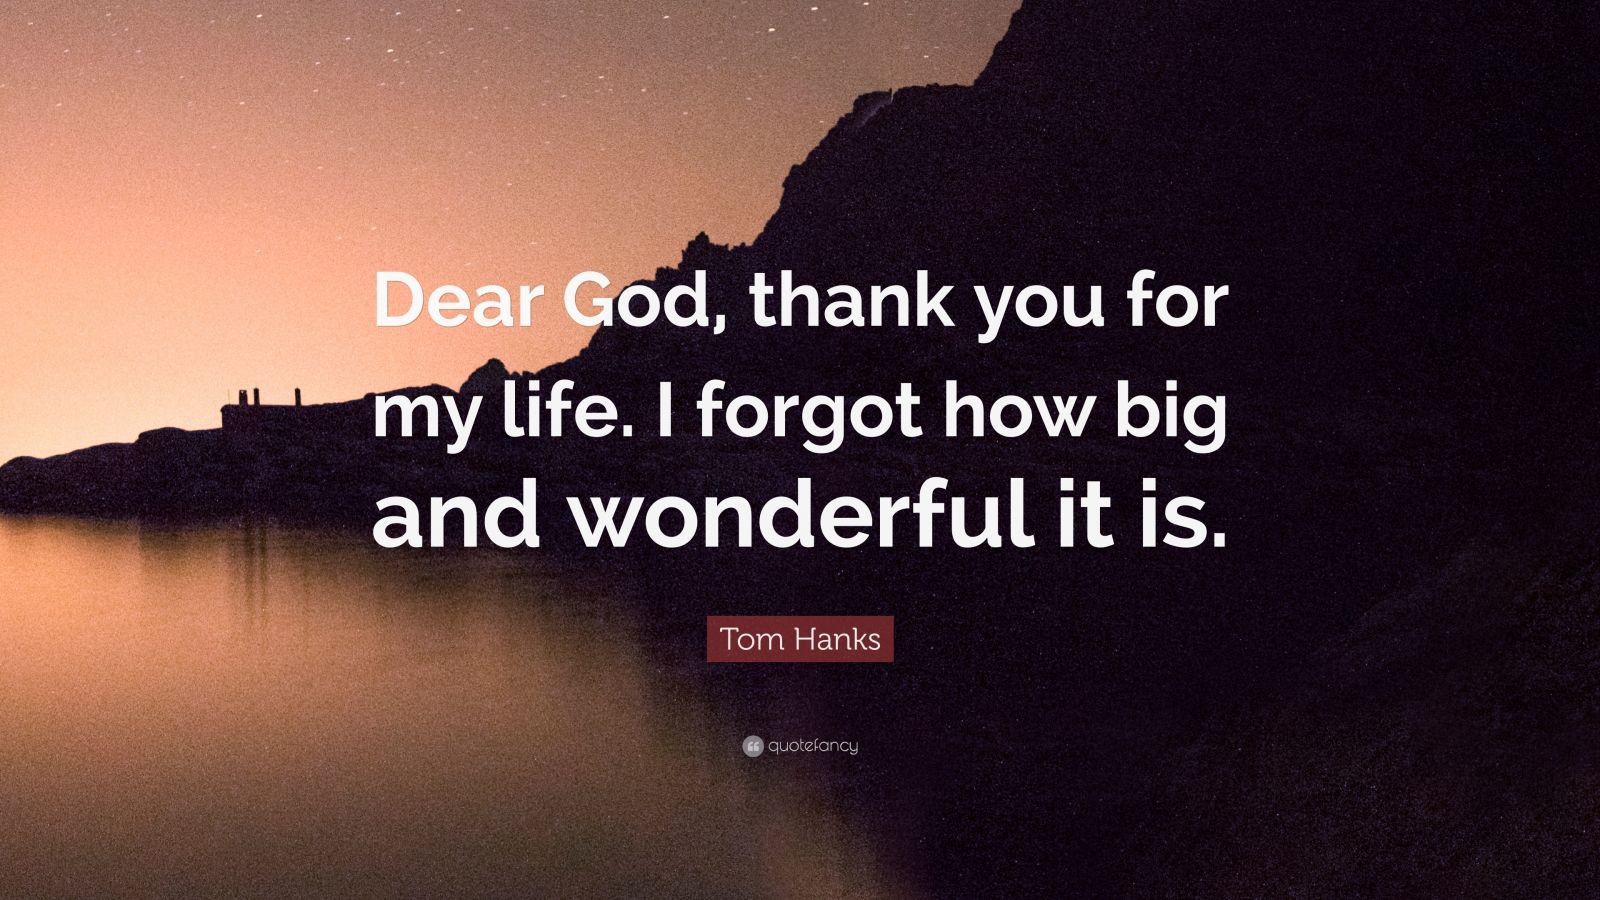 Tom Hanks Quote: “Dear God, thank you for my life. I forgot how big and